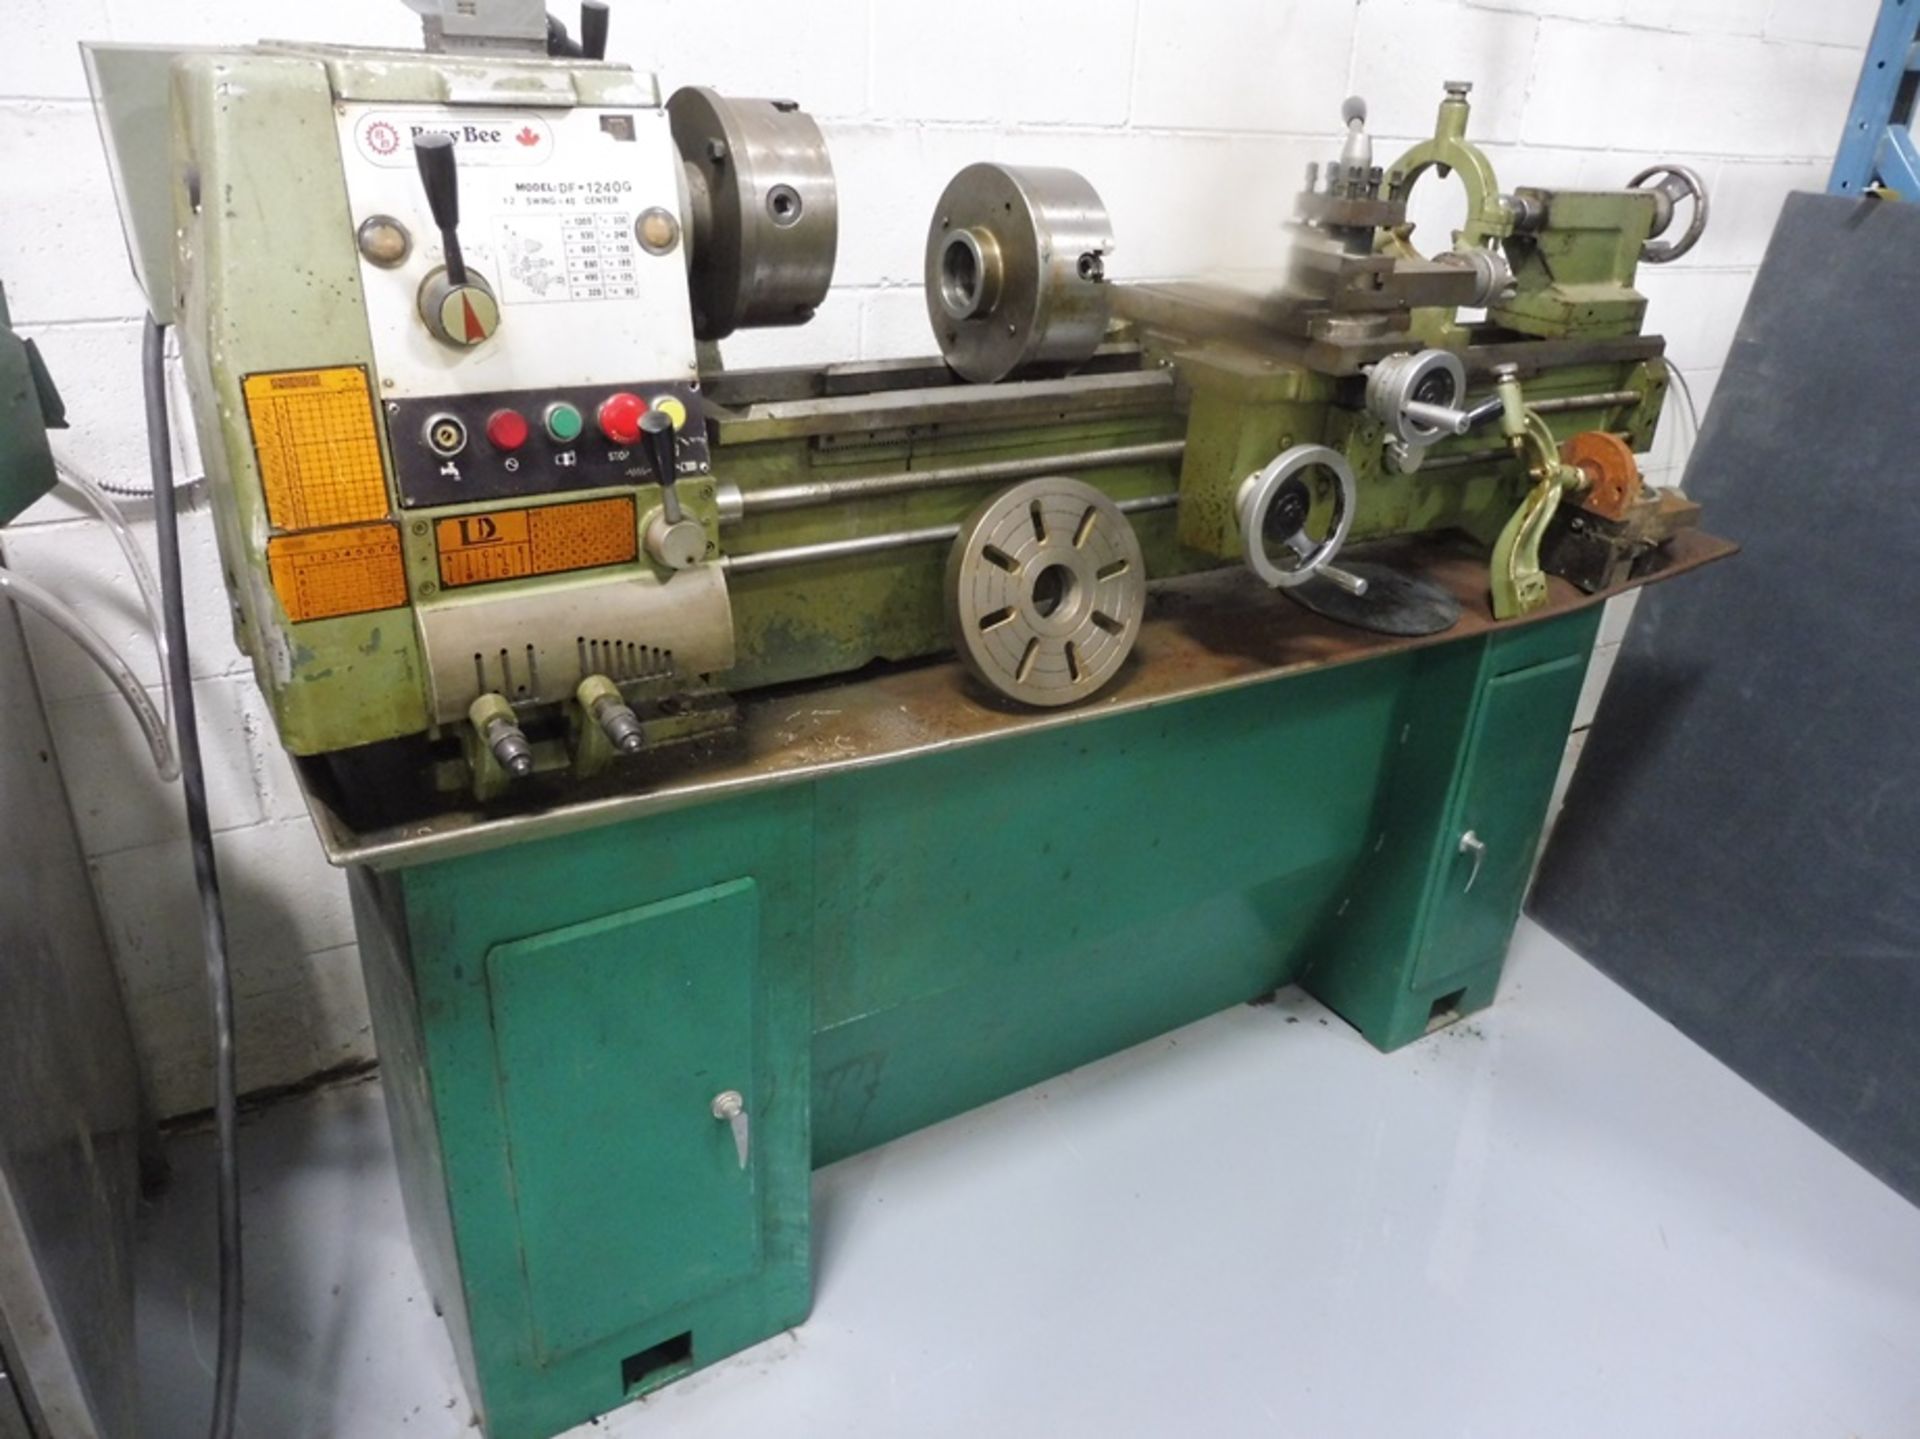 BUSY BEE "DF-1240G" Gap Bed Bench Type Tool Room Lathe, S/N: N/A, 12" Swing, 40" Centers, Inch &